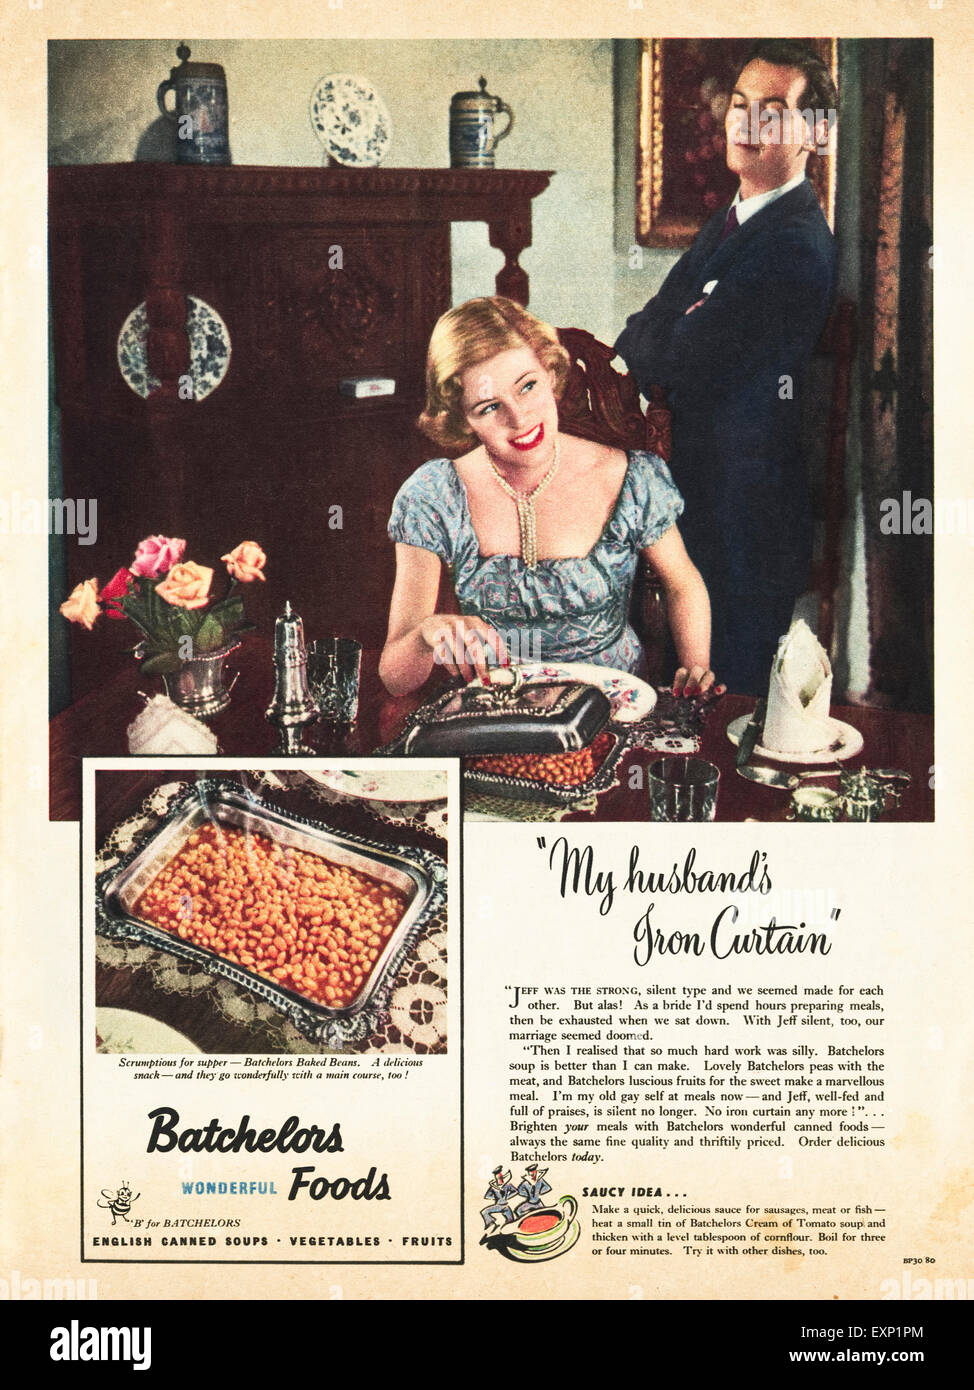 1950s advertisement circa 1951 magazine advert for BATCHELORS FOODS featuring baked beans, housewife & husband Stock Photo